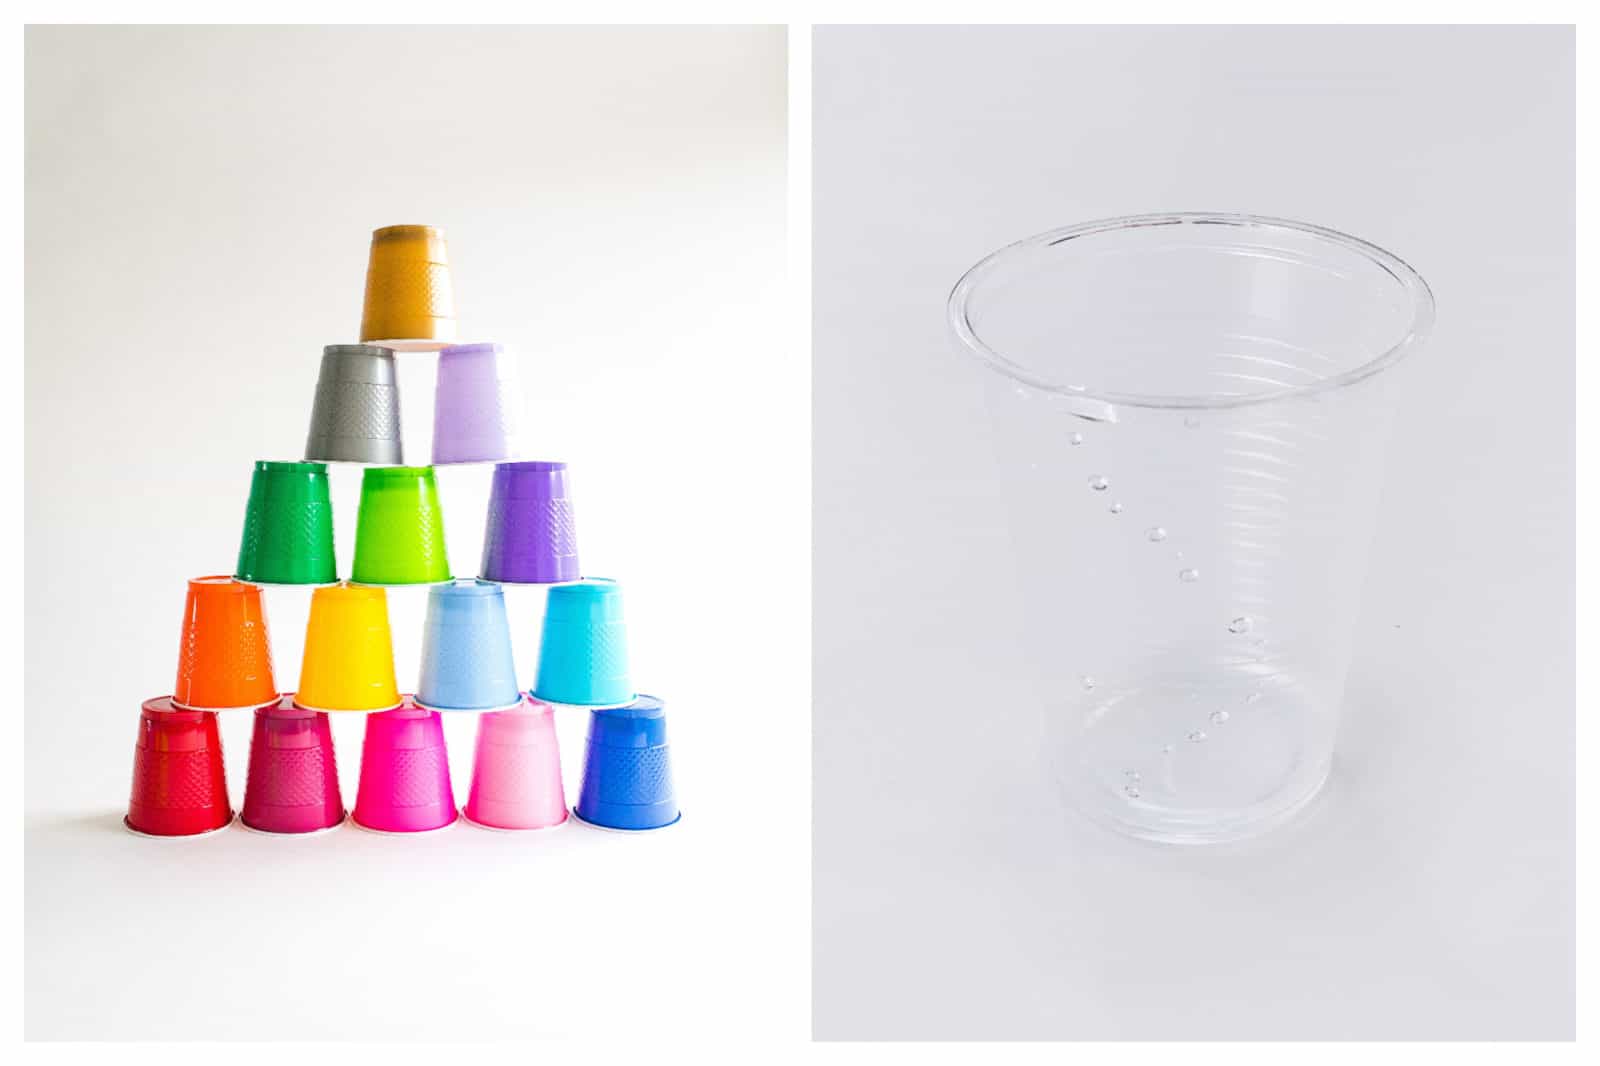 Don't be tempted by colorful plastic cups like those arranged in a pyramid here (left) and forget the common plastic cup (right) as France's plastic ban on single-use plastics comes into play. 